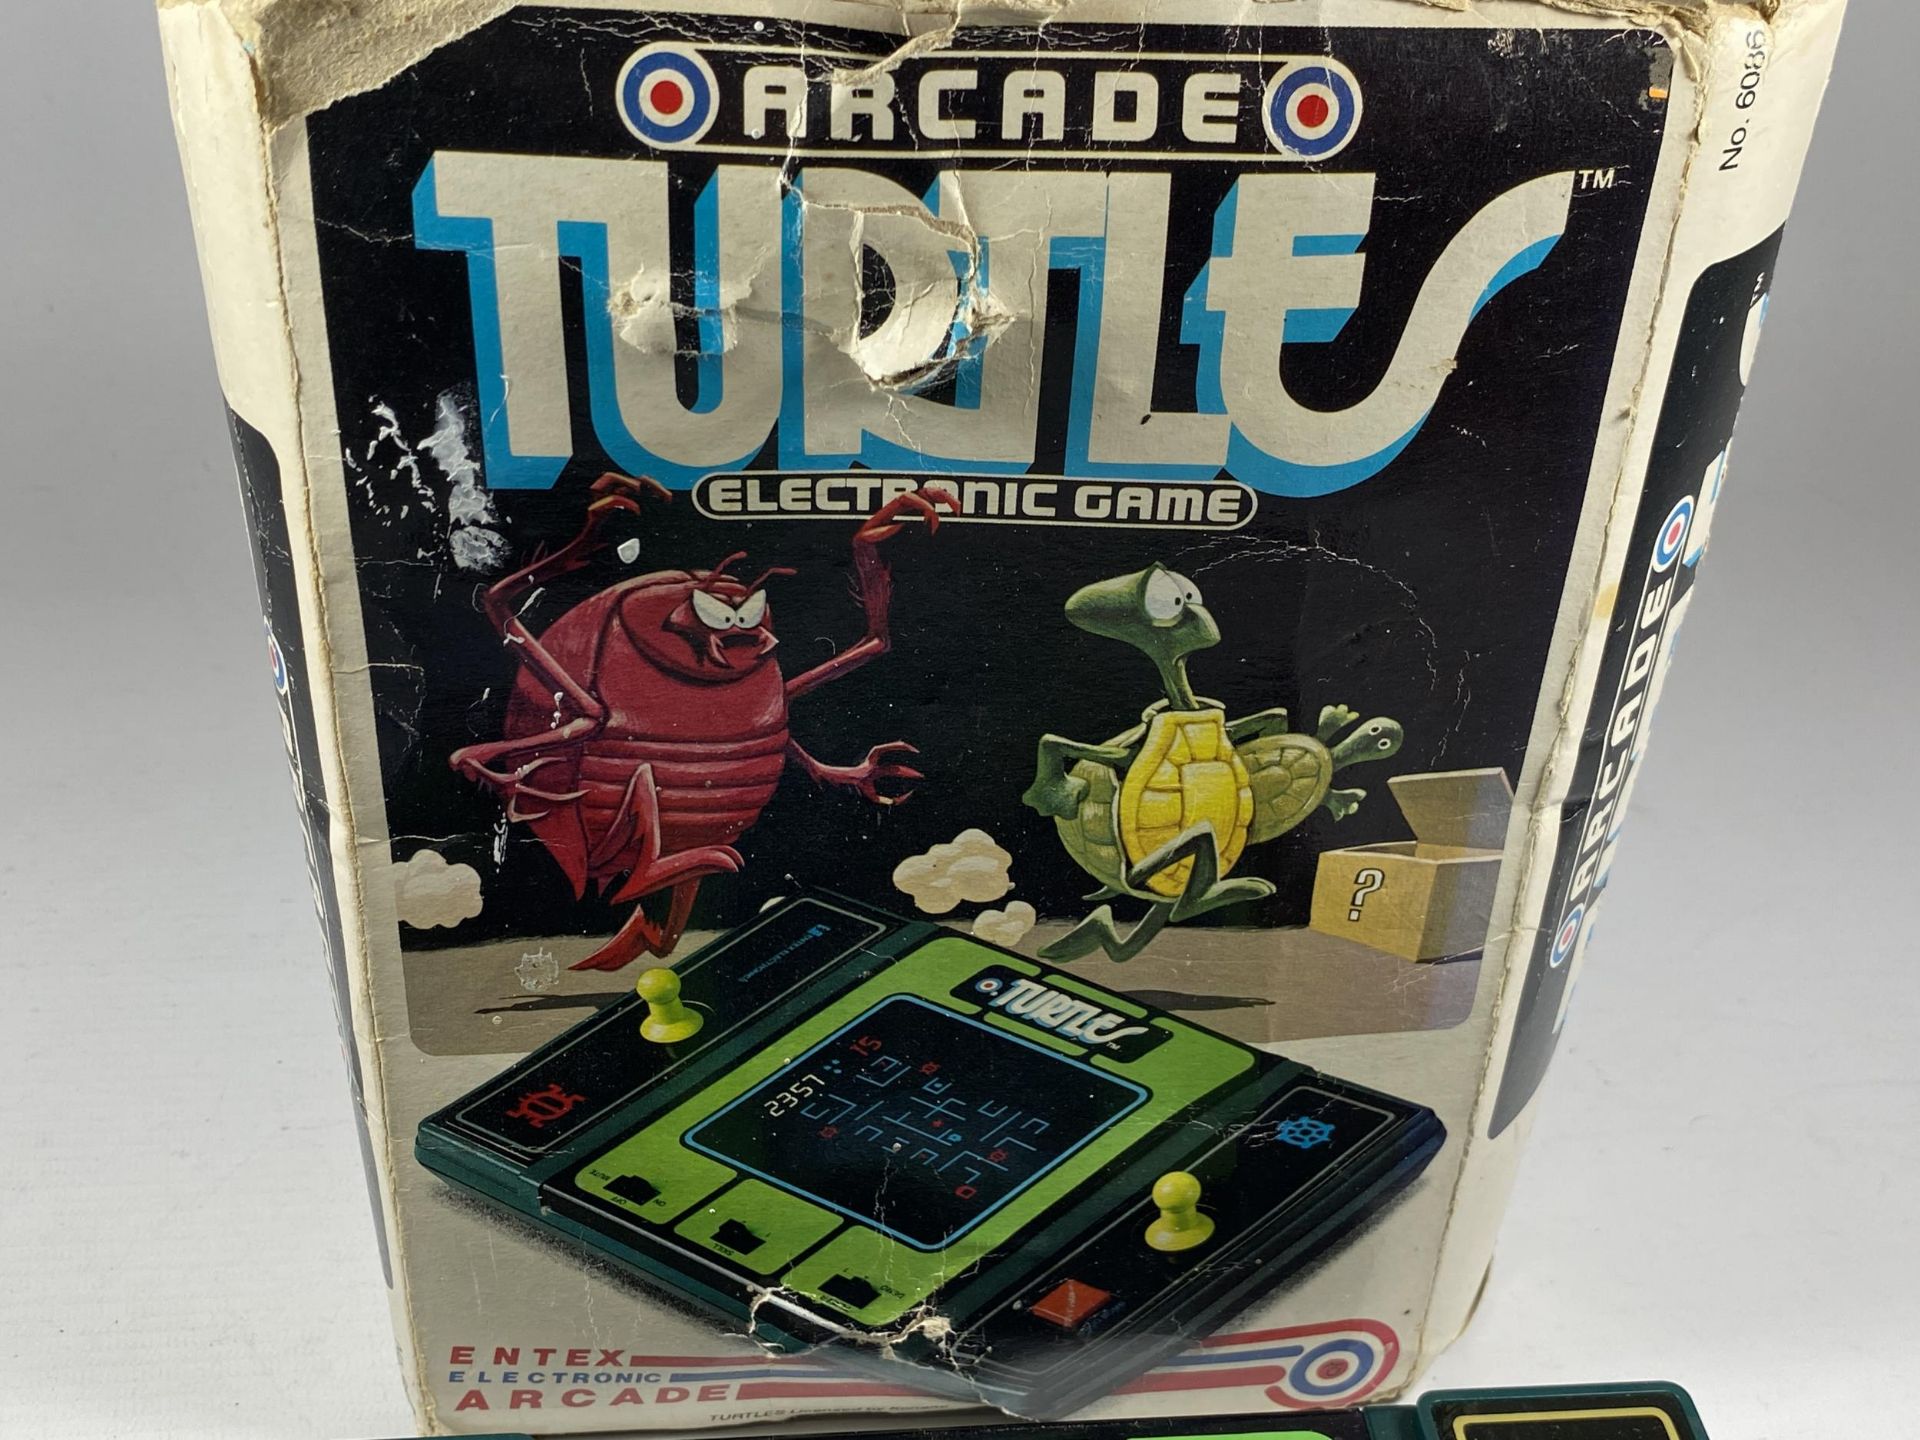 A RETRO BOXED ARCADE TURTLES ELECTRONIC GAME CONSOLE - Image 3 of 3